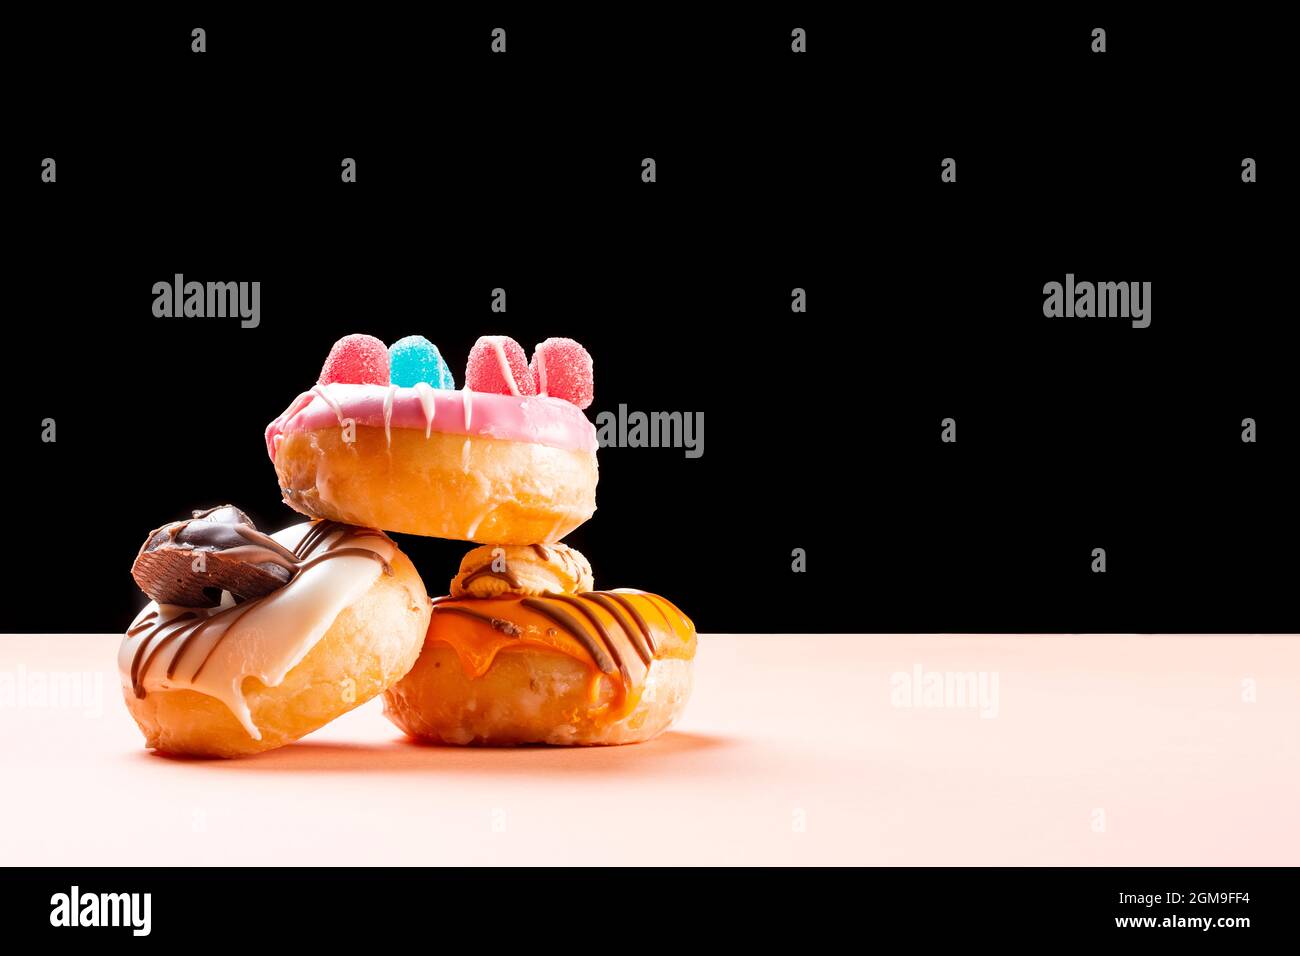 Photograph of 3 donuts decorated with jelly beans and drawn with chocolate.The photo is taken in horizontal format on a cream colored cardboard and a Stock Photo